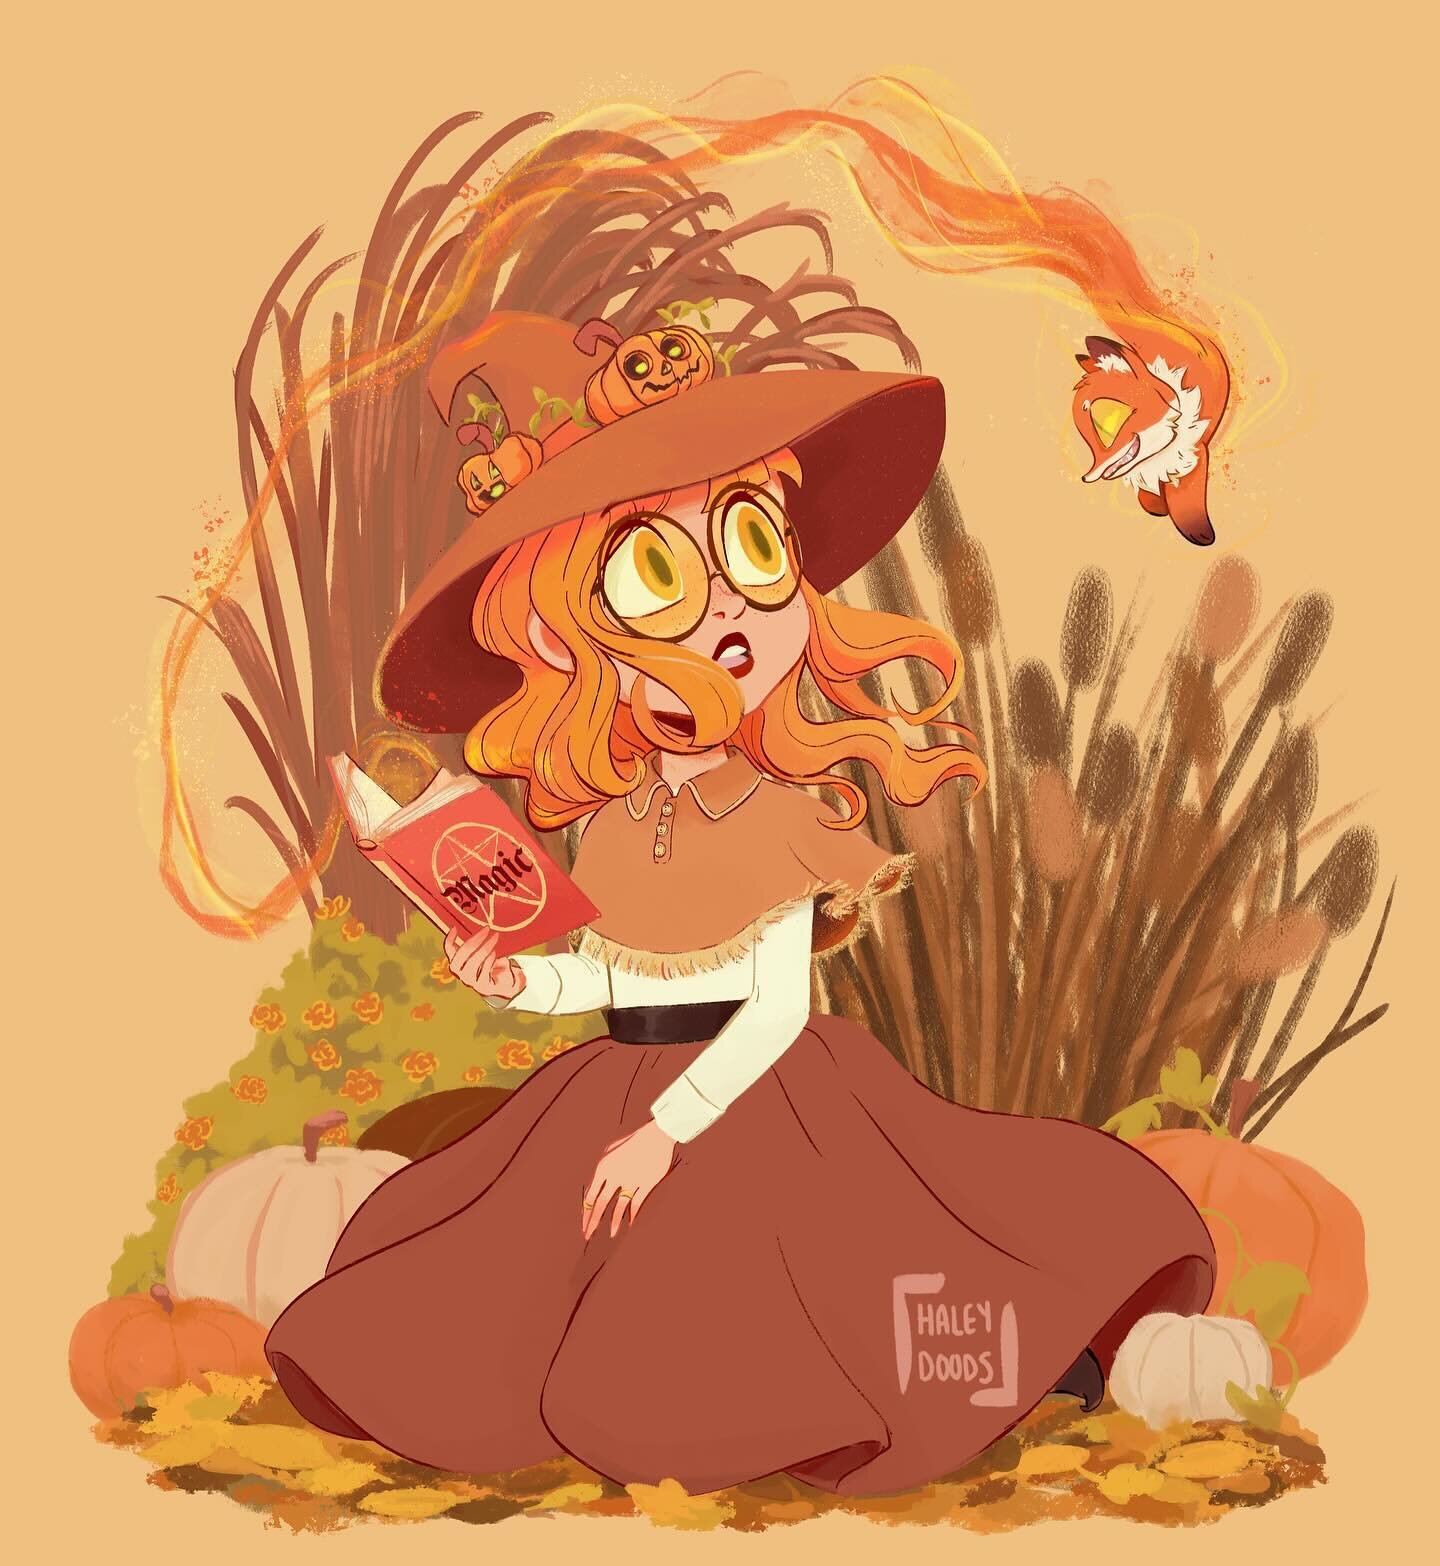 Had a very cozy time drawing this autumn witch 🍁 shoutout to @mrsbutterd for such a cute #dtiys prompt!
.
.
.
#mrsbutterwitch #dtiyschallenge #illustrationartists #illustragram #illustratorsoninstagram #childrensbookillustration #childrensbookillust